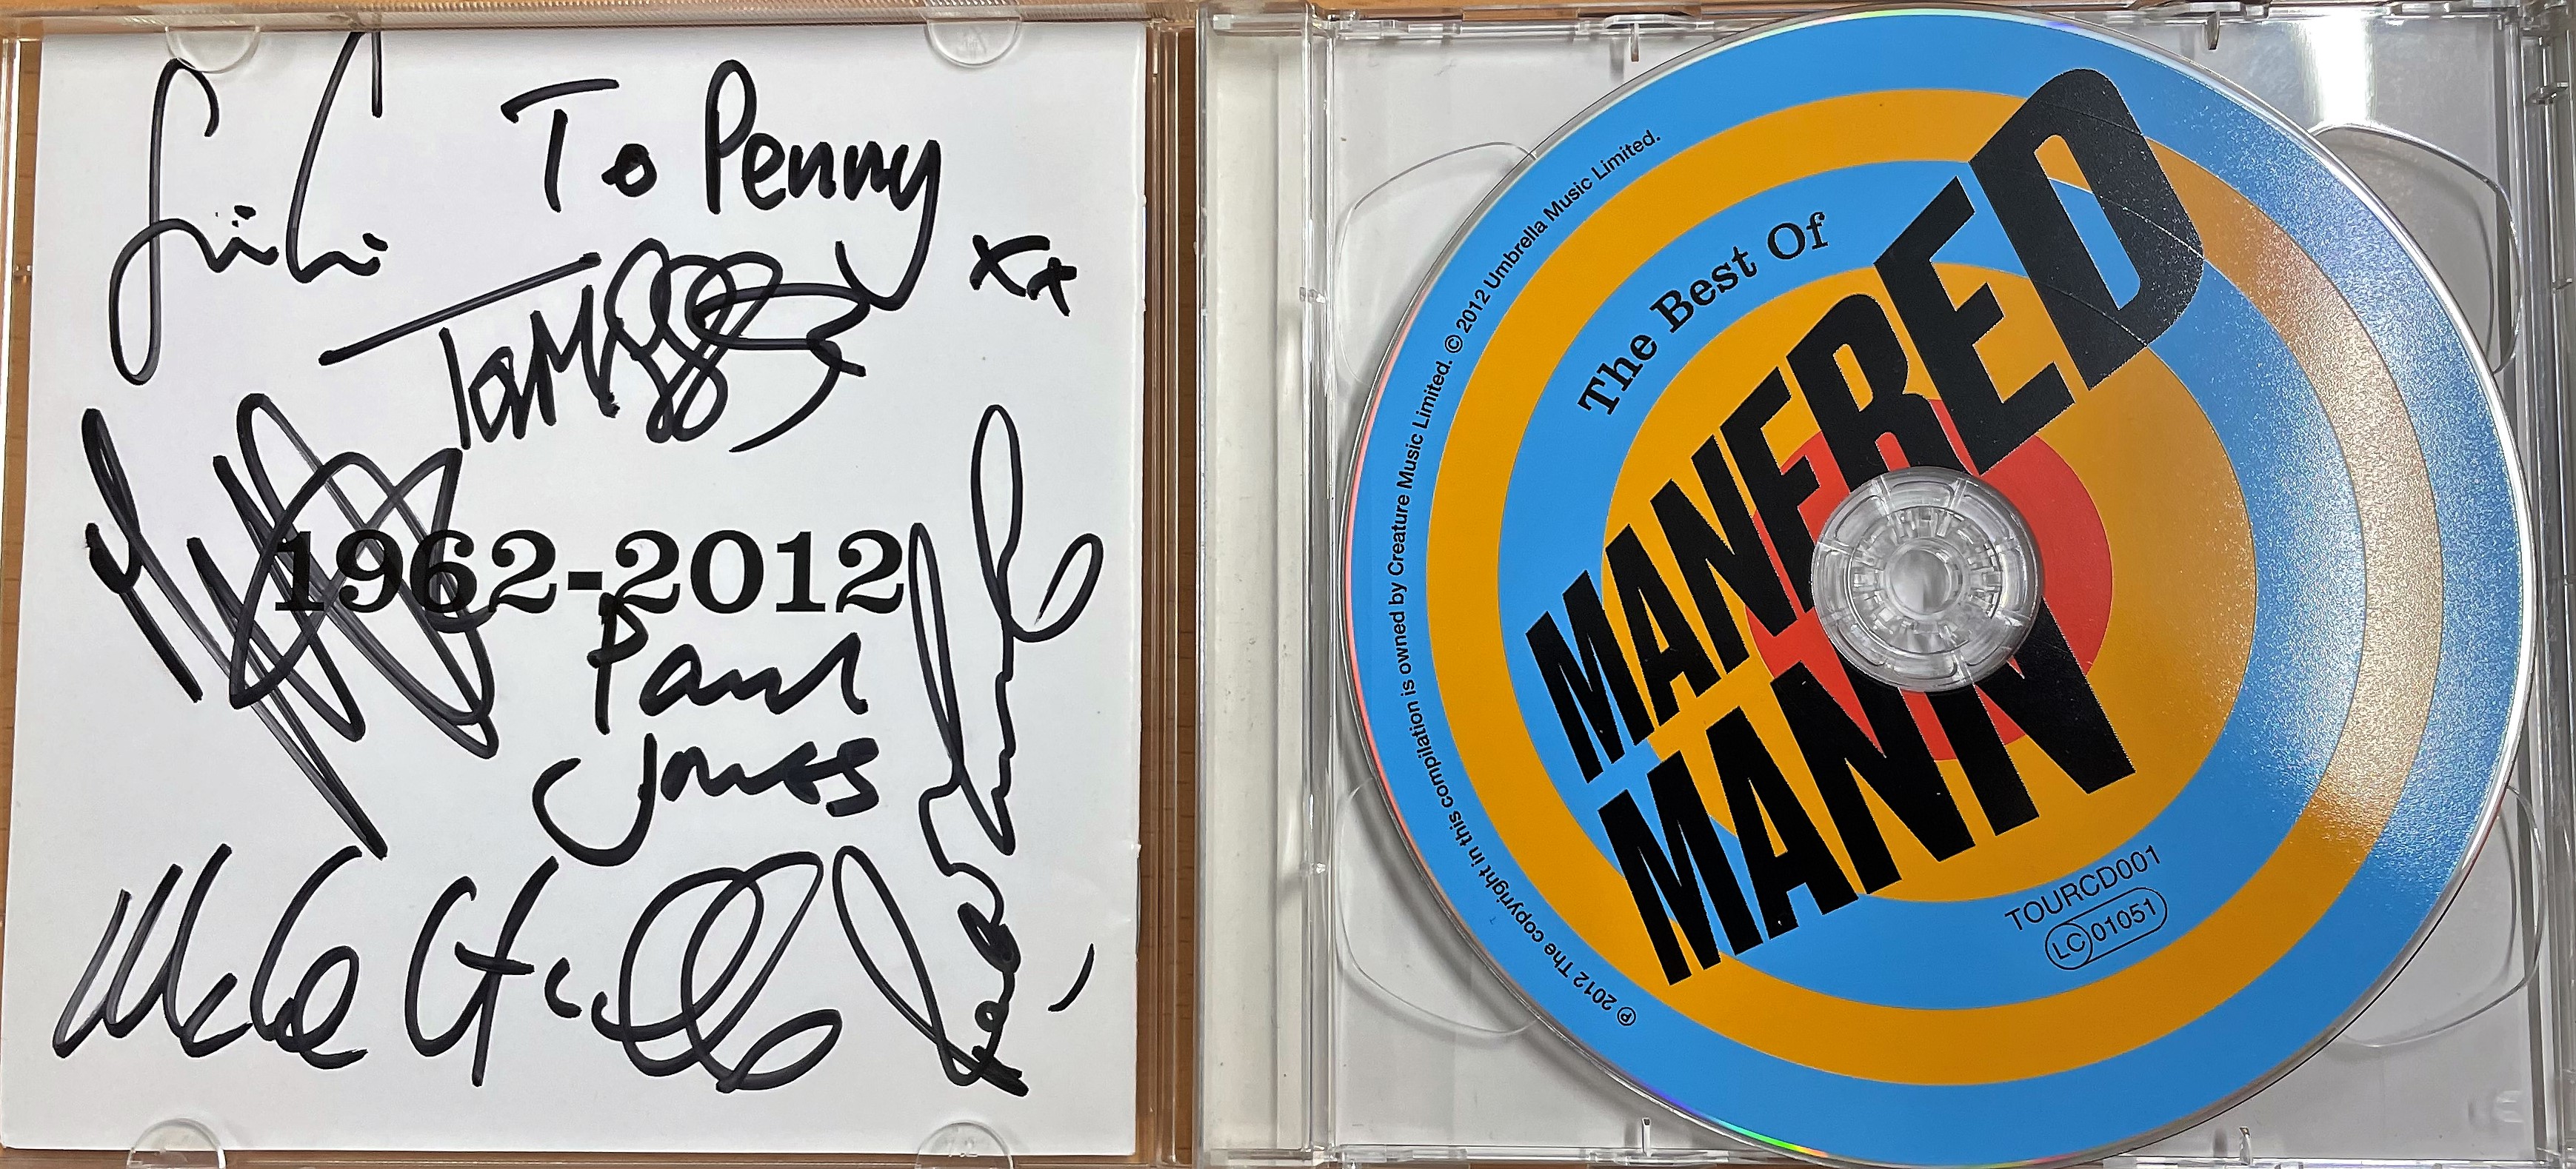 Manfred Mann multi signed CD sleeve titled The Best of Manfred Mann includes all band members